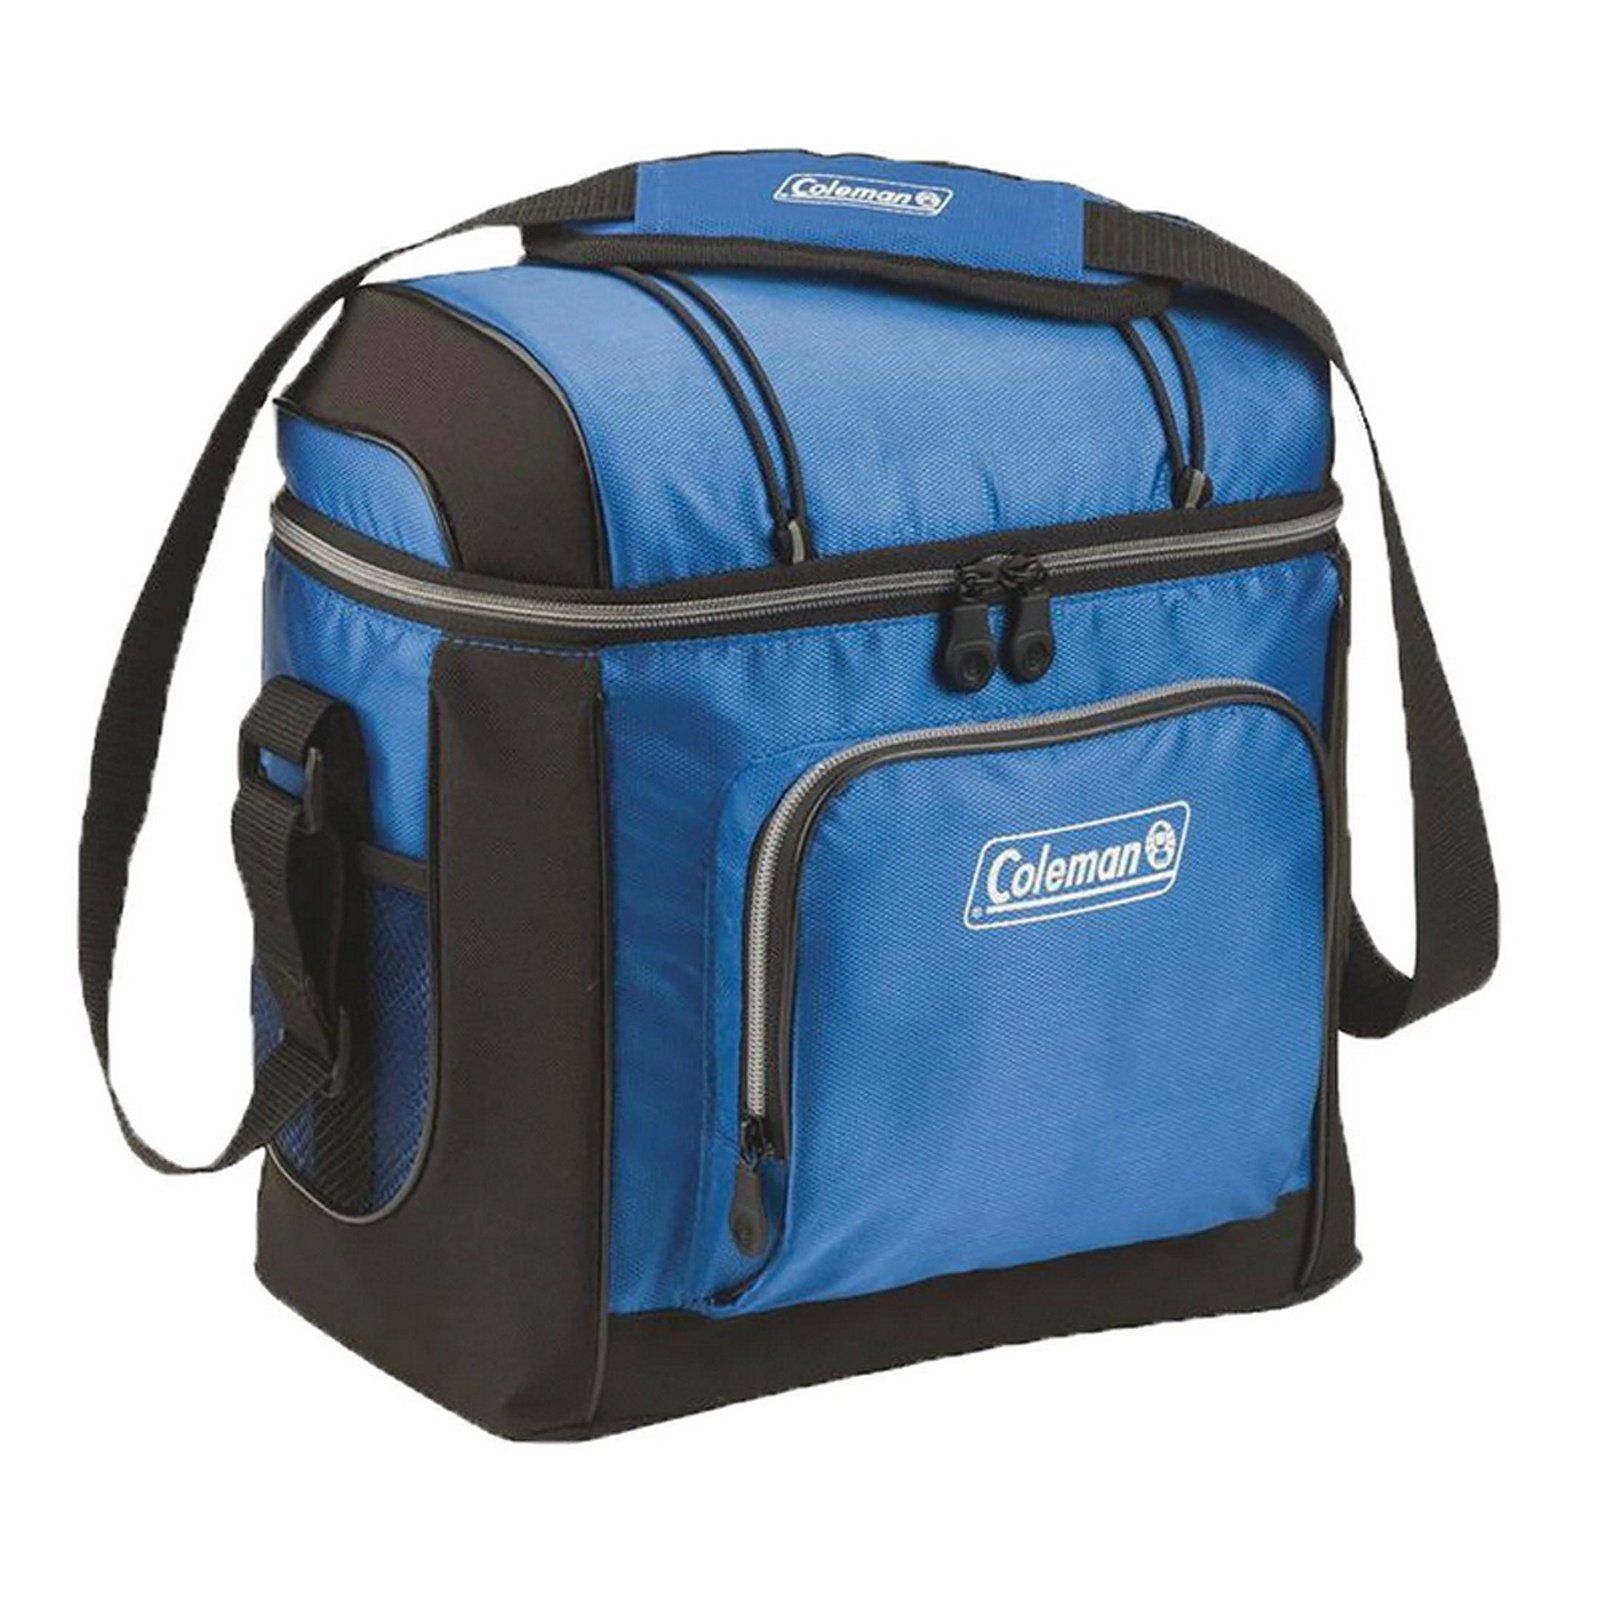 Cooler Bag Coleman 30 Can Soft Cool Bag Insulated Camping Picnic